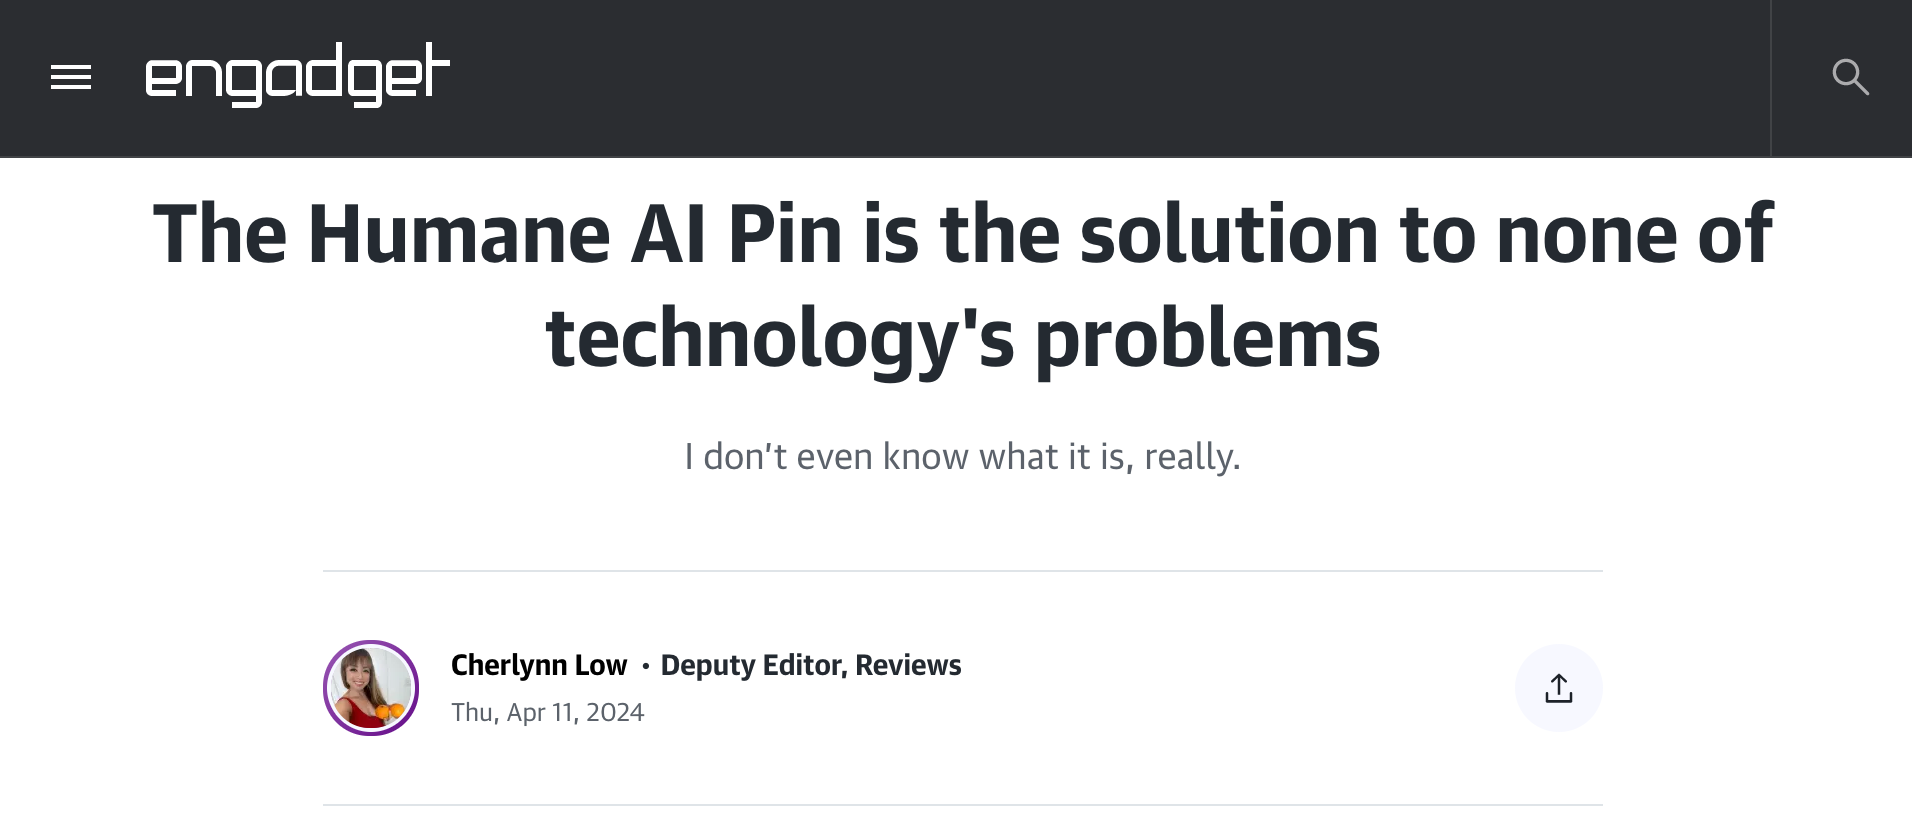 Headline from Engadget’s Cherlynn Low says: The Human AI Pin is the solution to none of technology’s problems